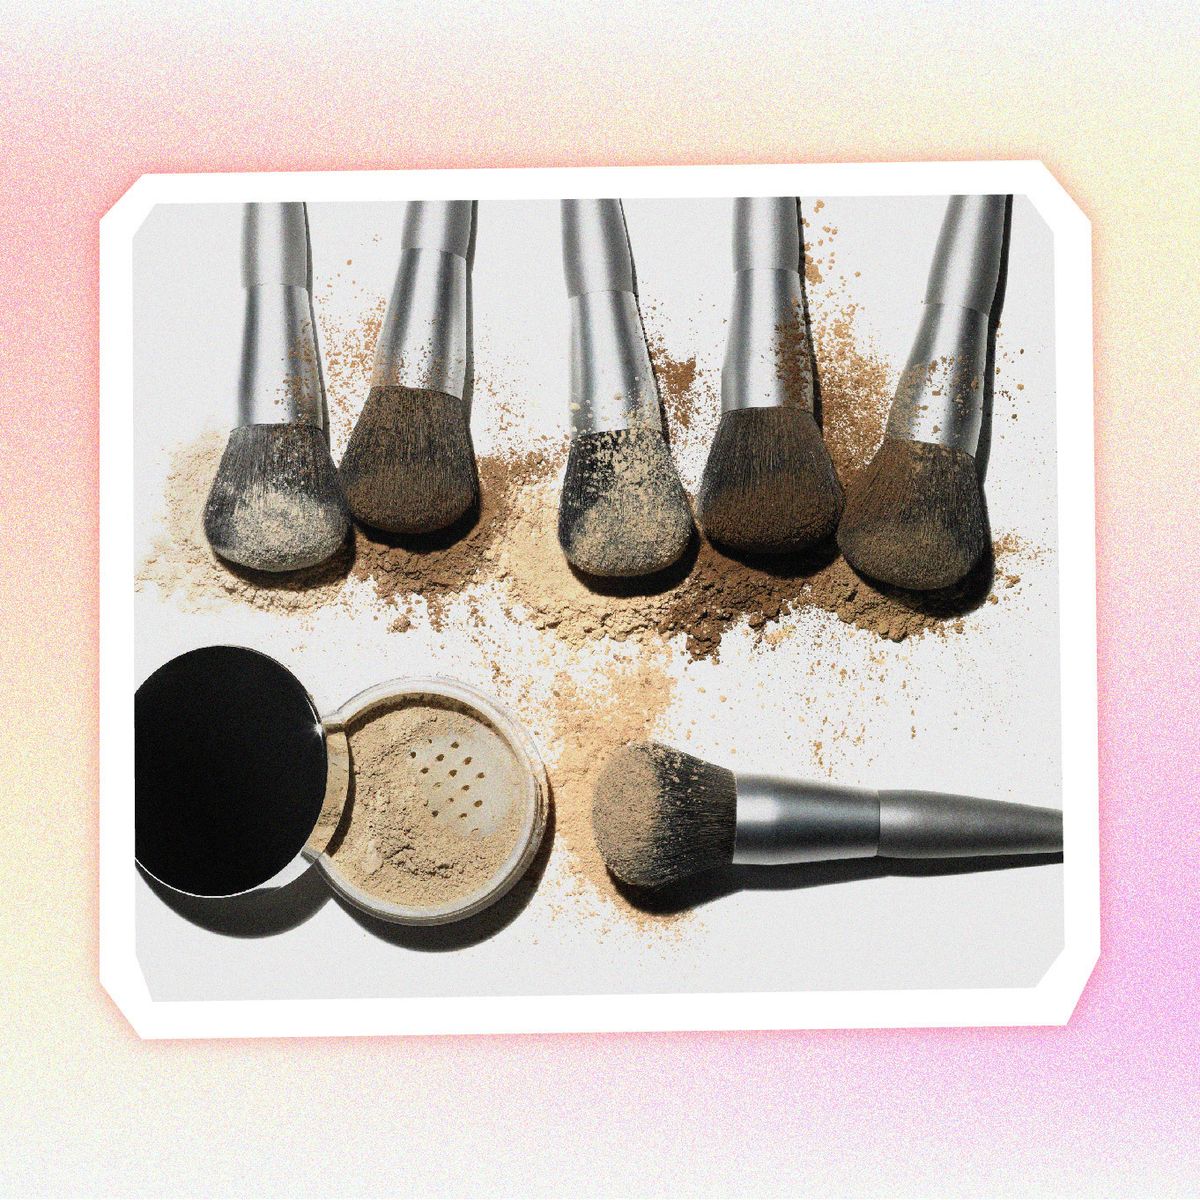 How To Clean Makeup Brushes, According to Experts